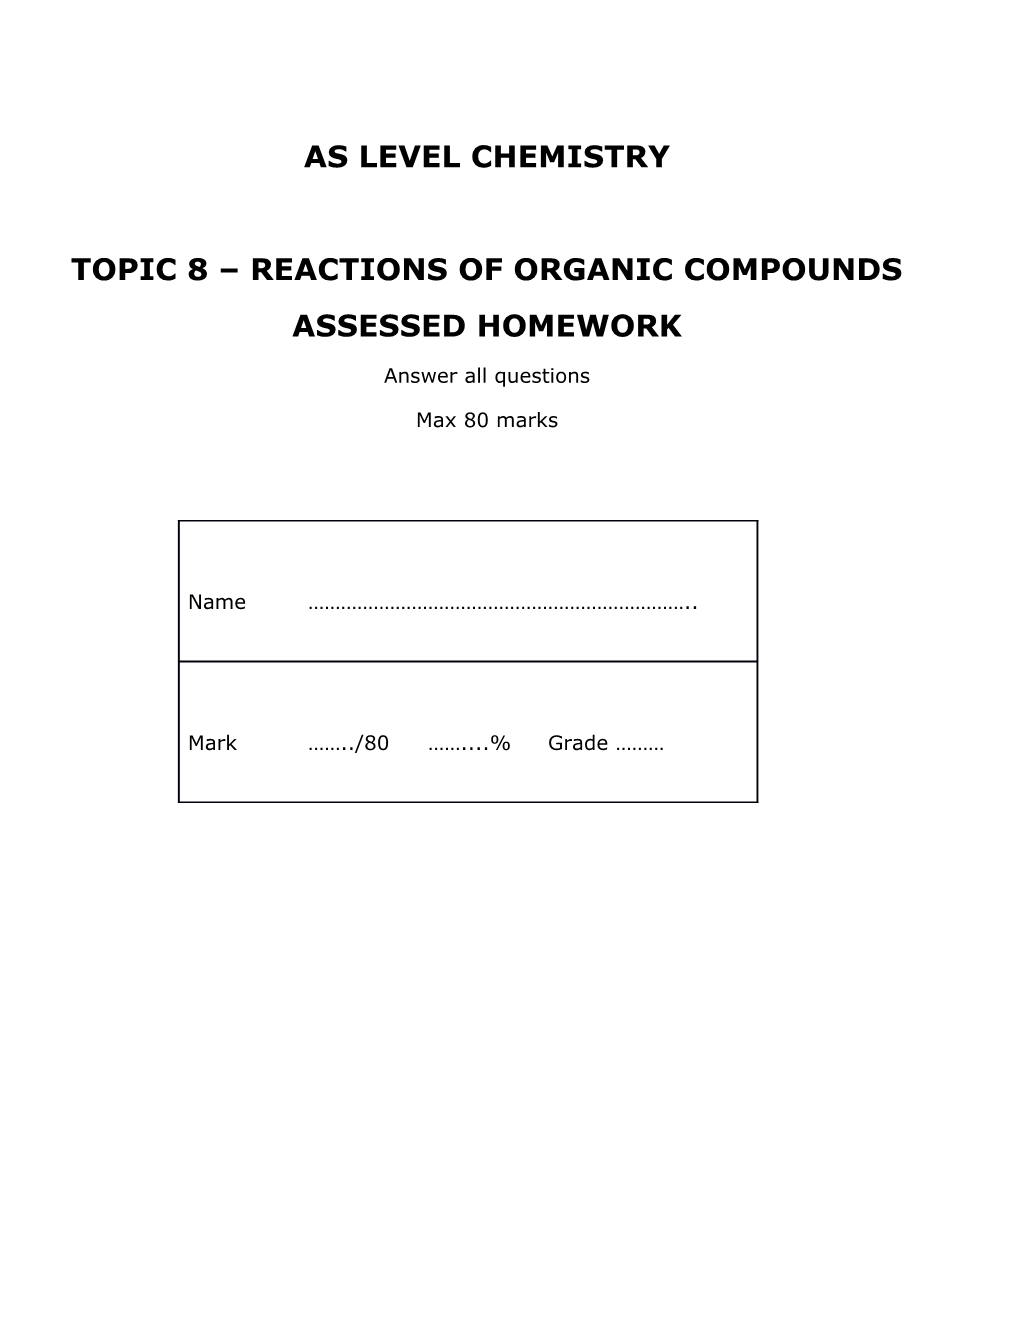 Topic 8 Reactions of Organic Compounds